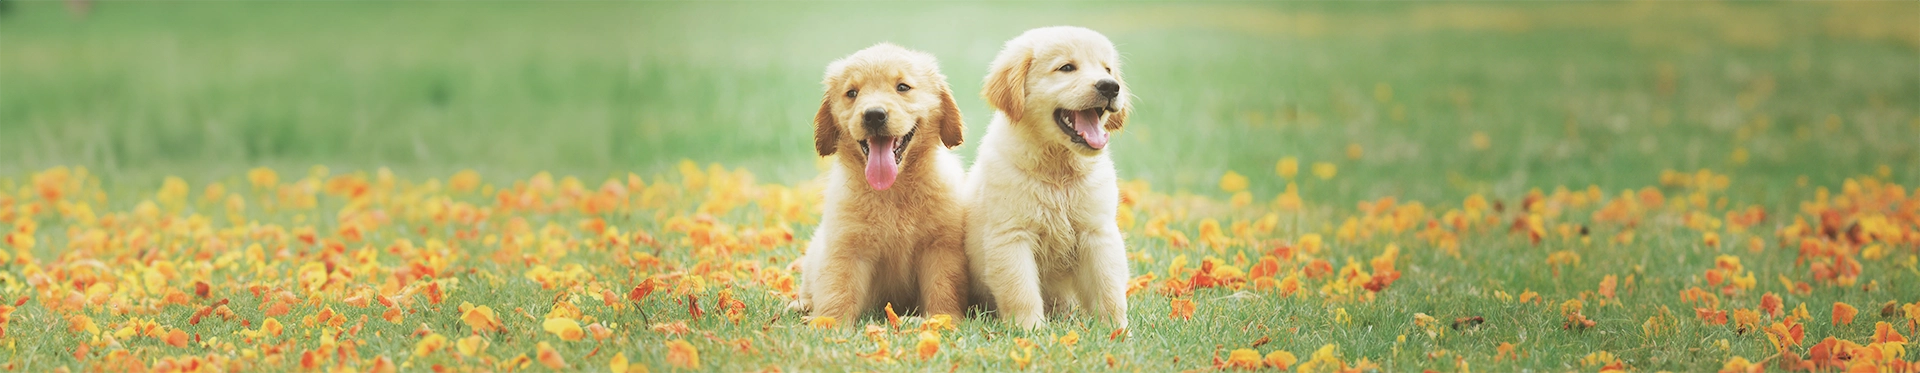 Two yellow puppies sitting in a field of grass and orange flowers